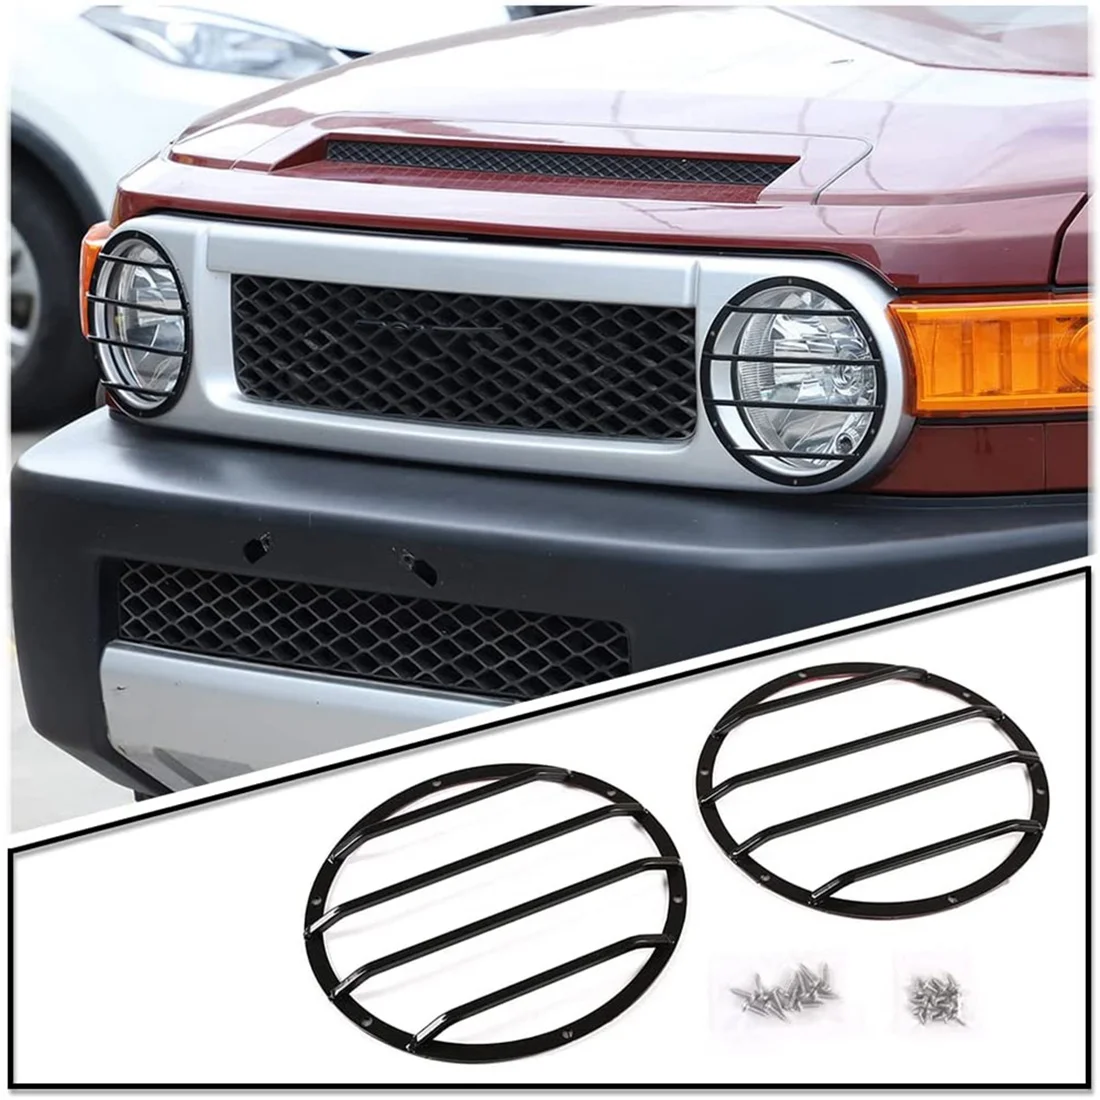 

Headlight Guards Cover Trim Accessories for Toyota FJ Cruiser 2007-2021 Headlight Protection Lampshade ,Black